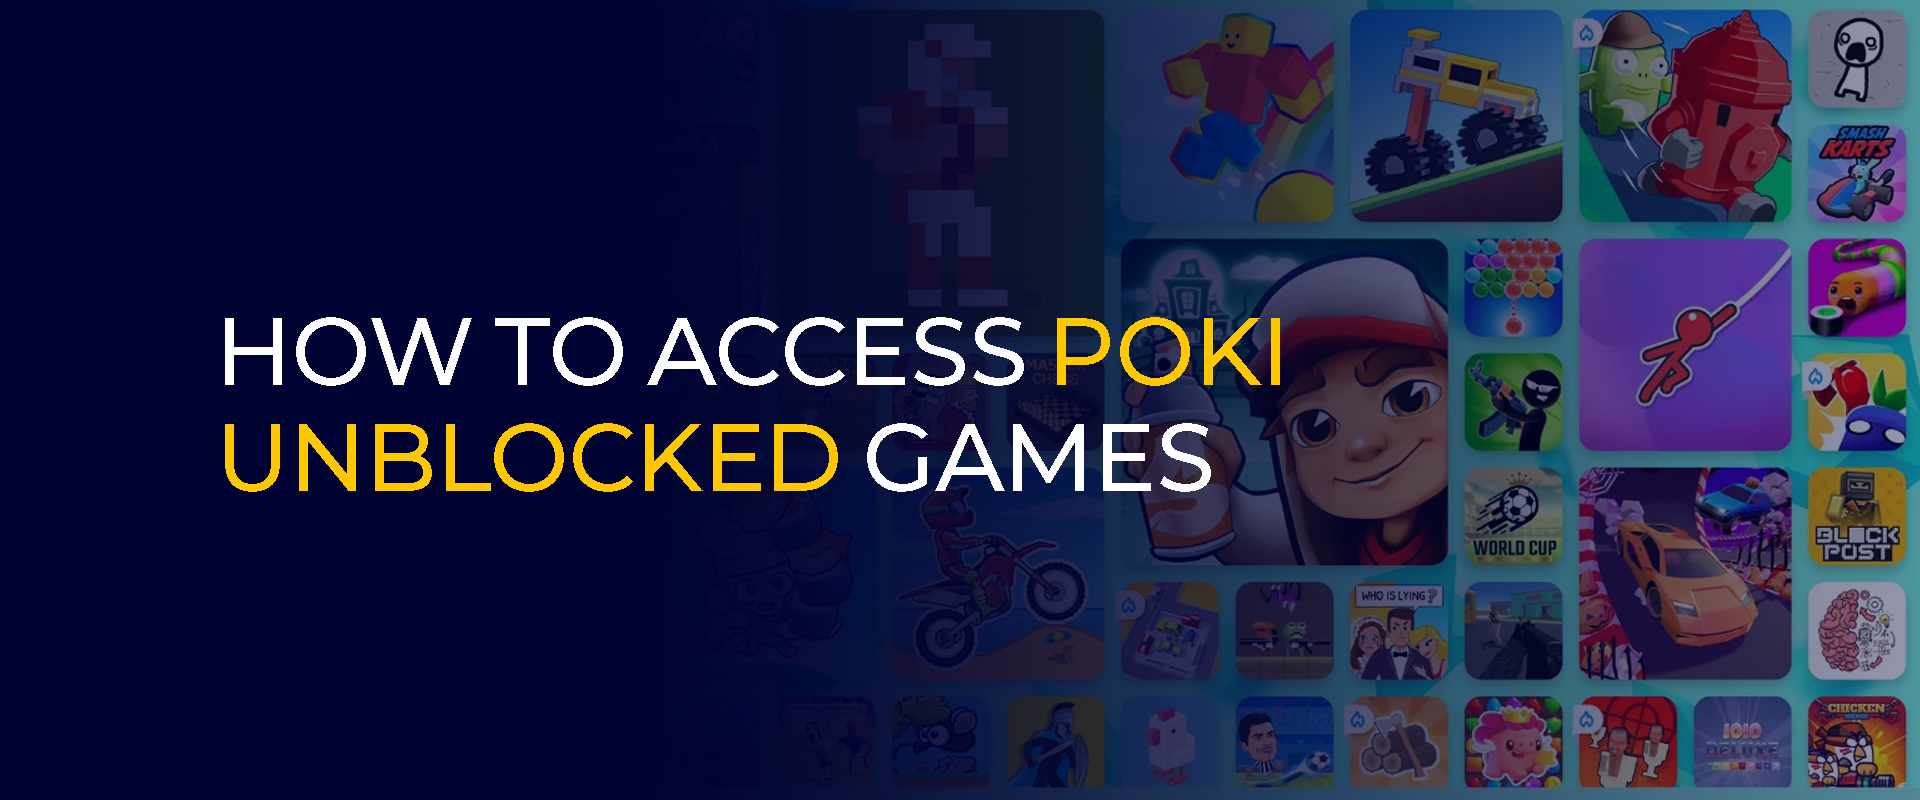 How To Access Poki Unblocked Games